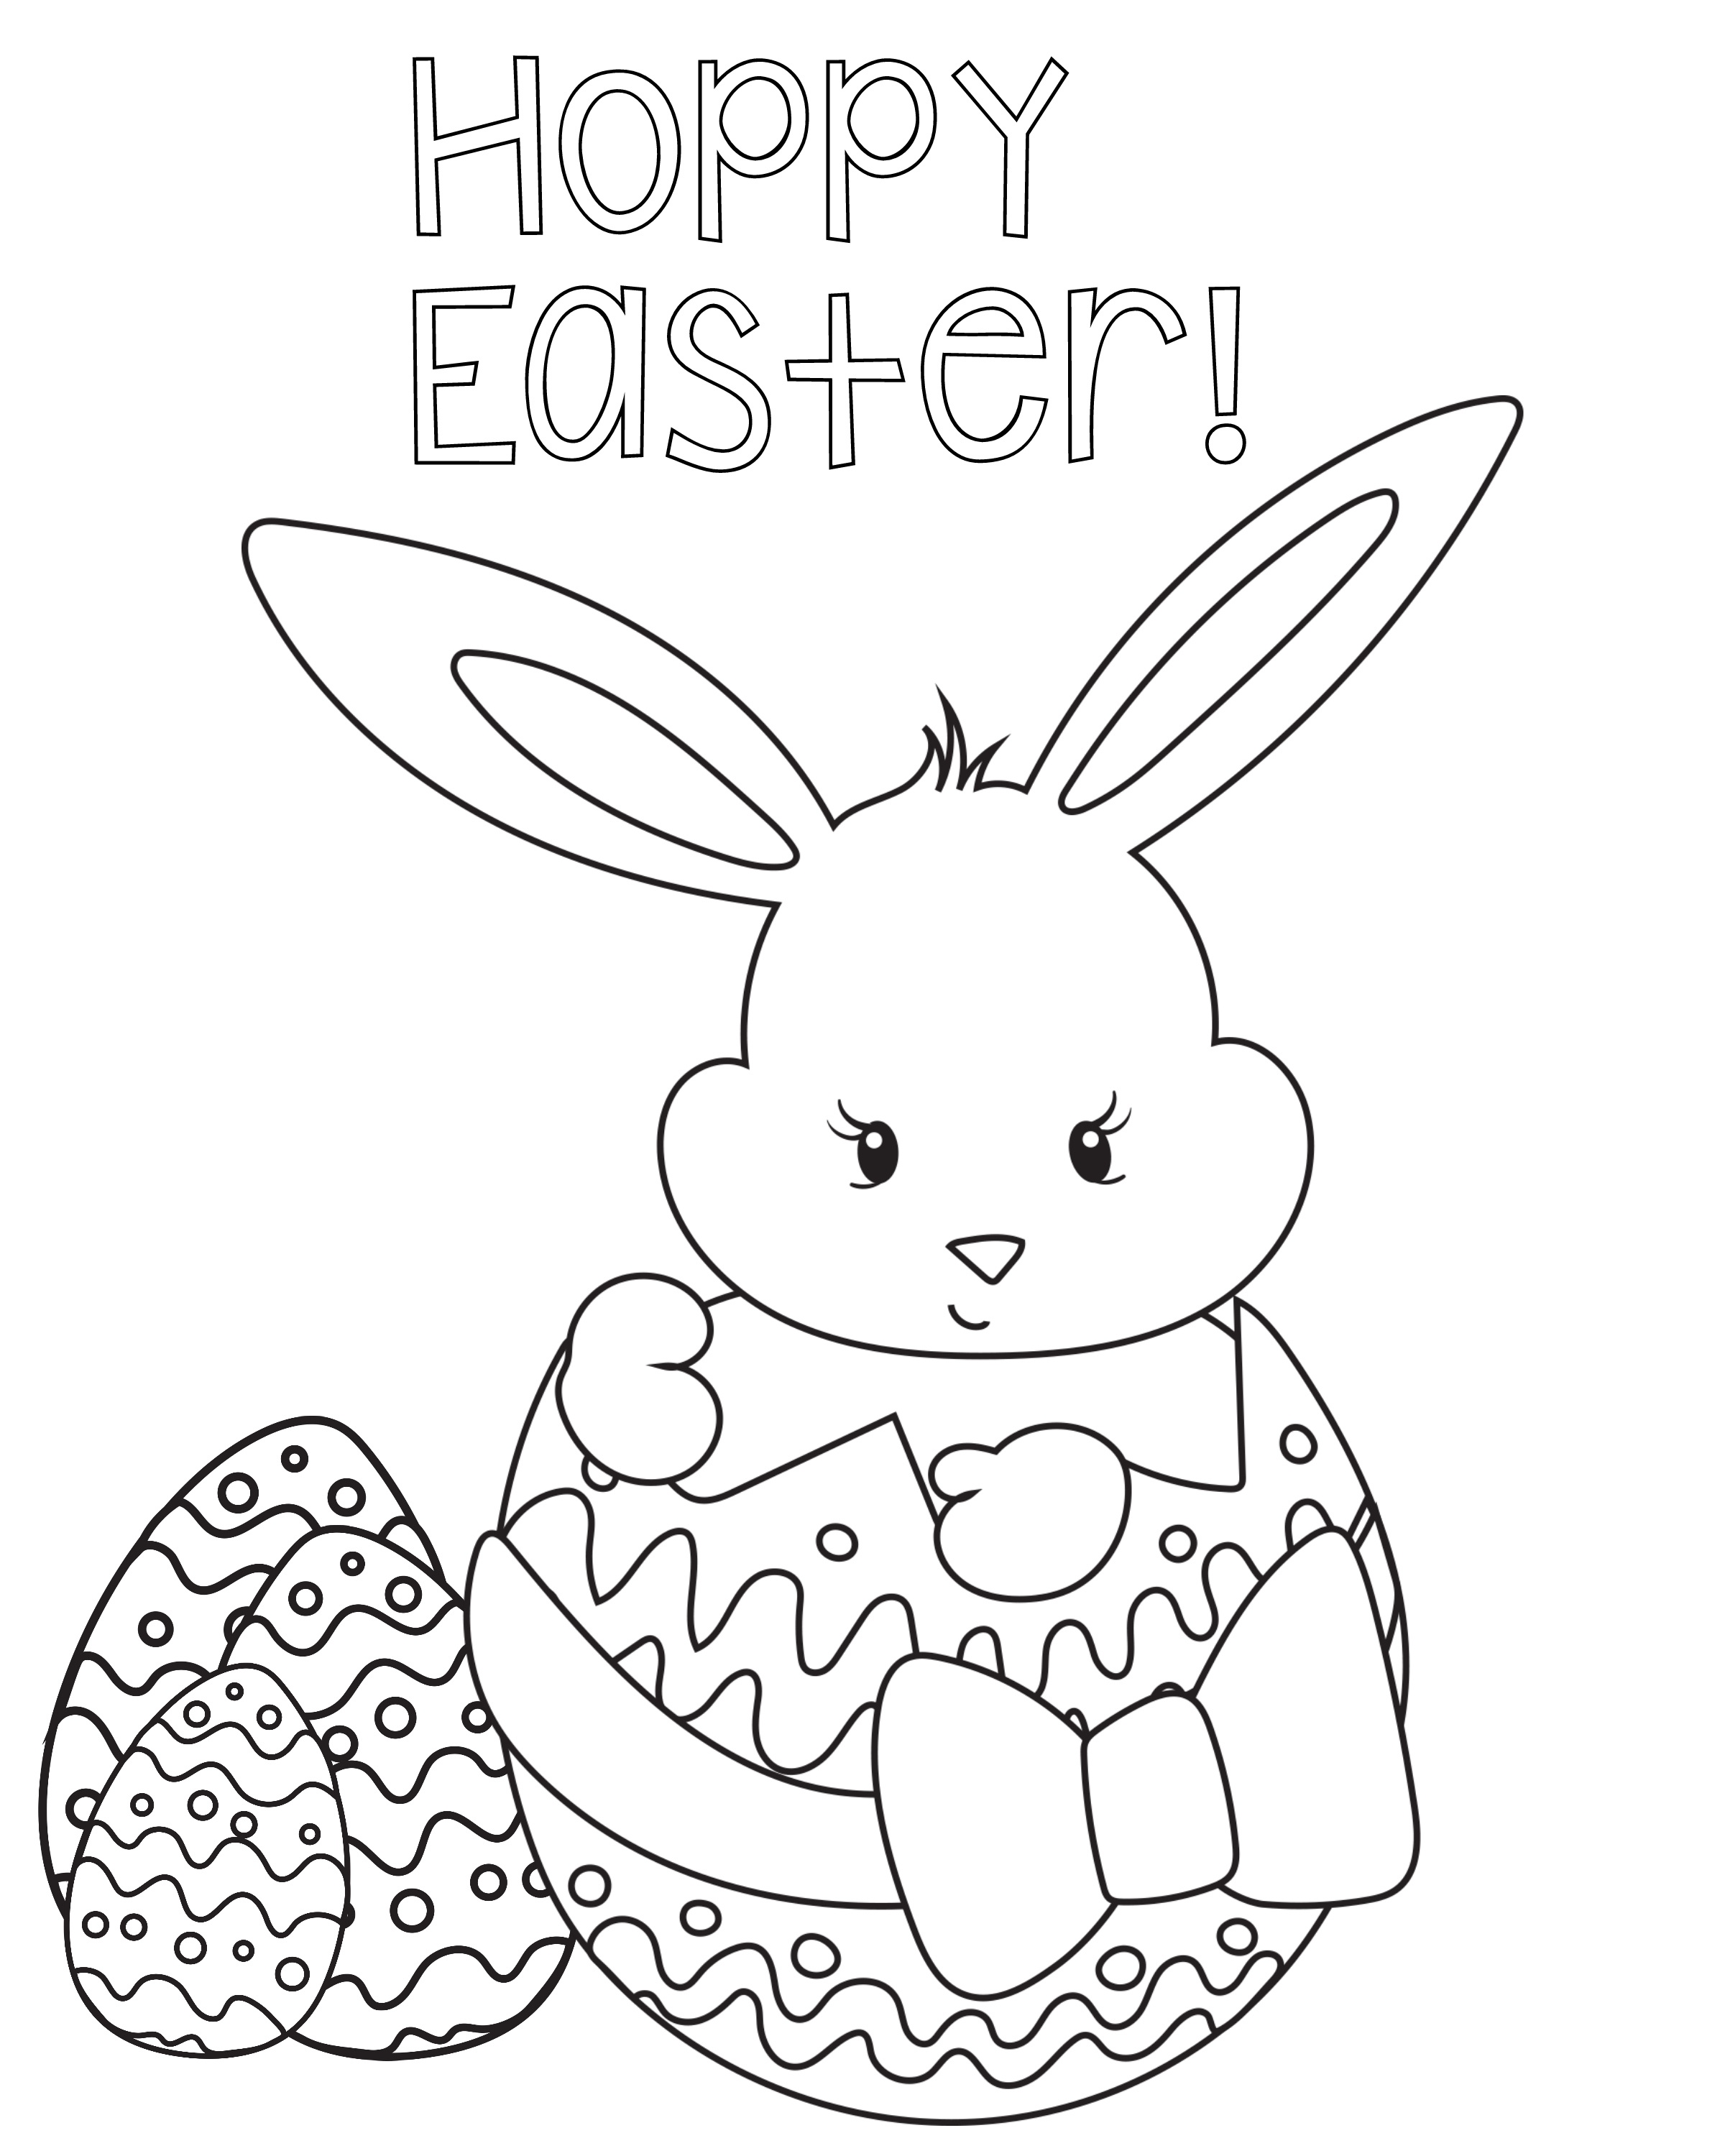 Easter Coloring Pages For Kids - Crazy Little Projects - Coloring Pages Free Printable Easter